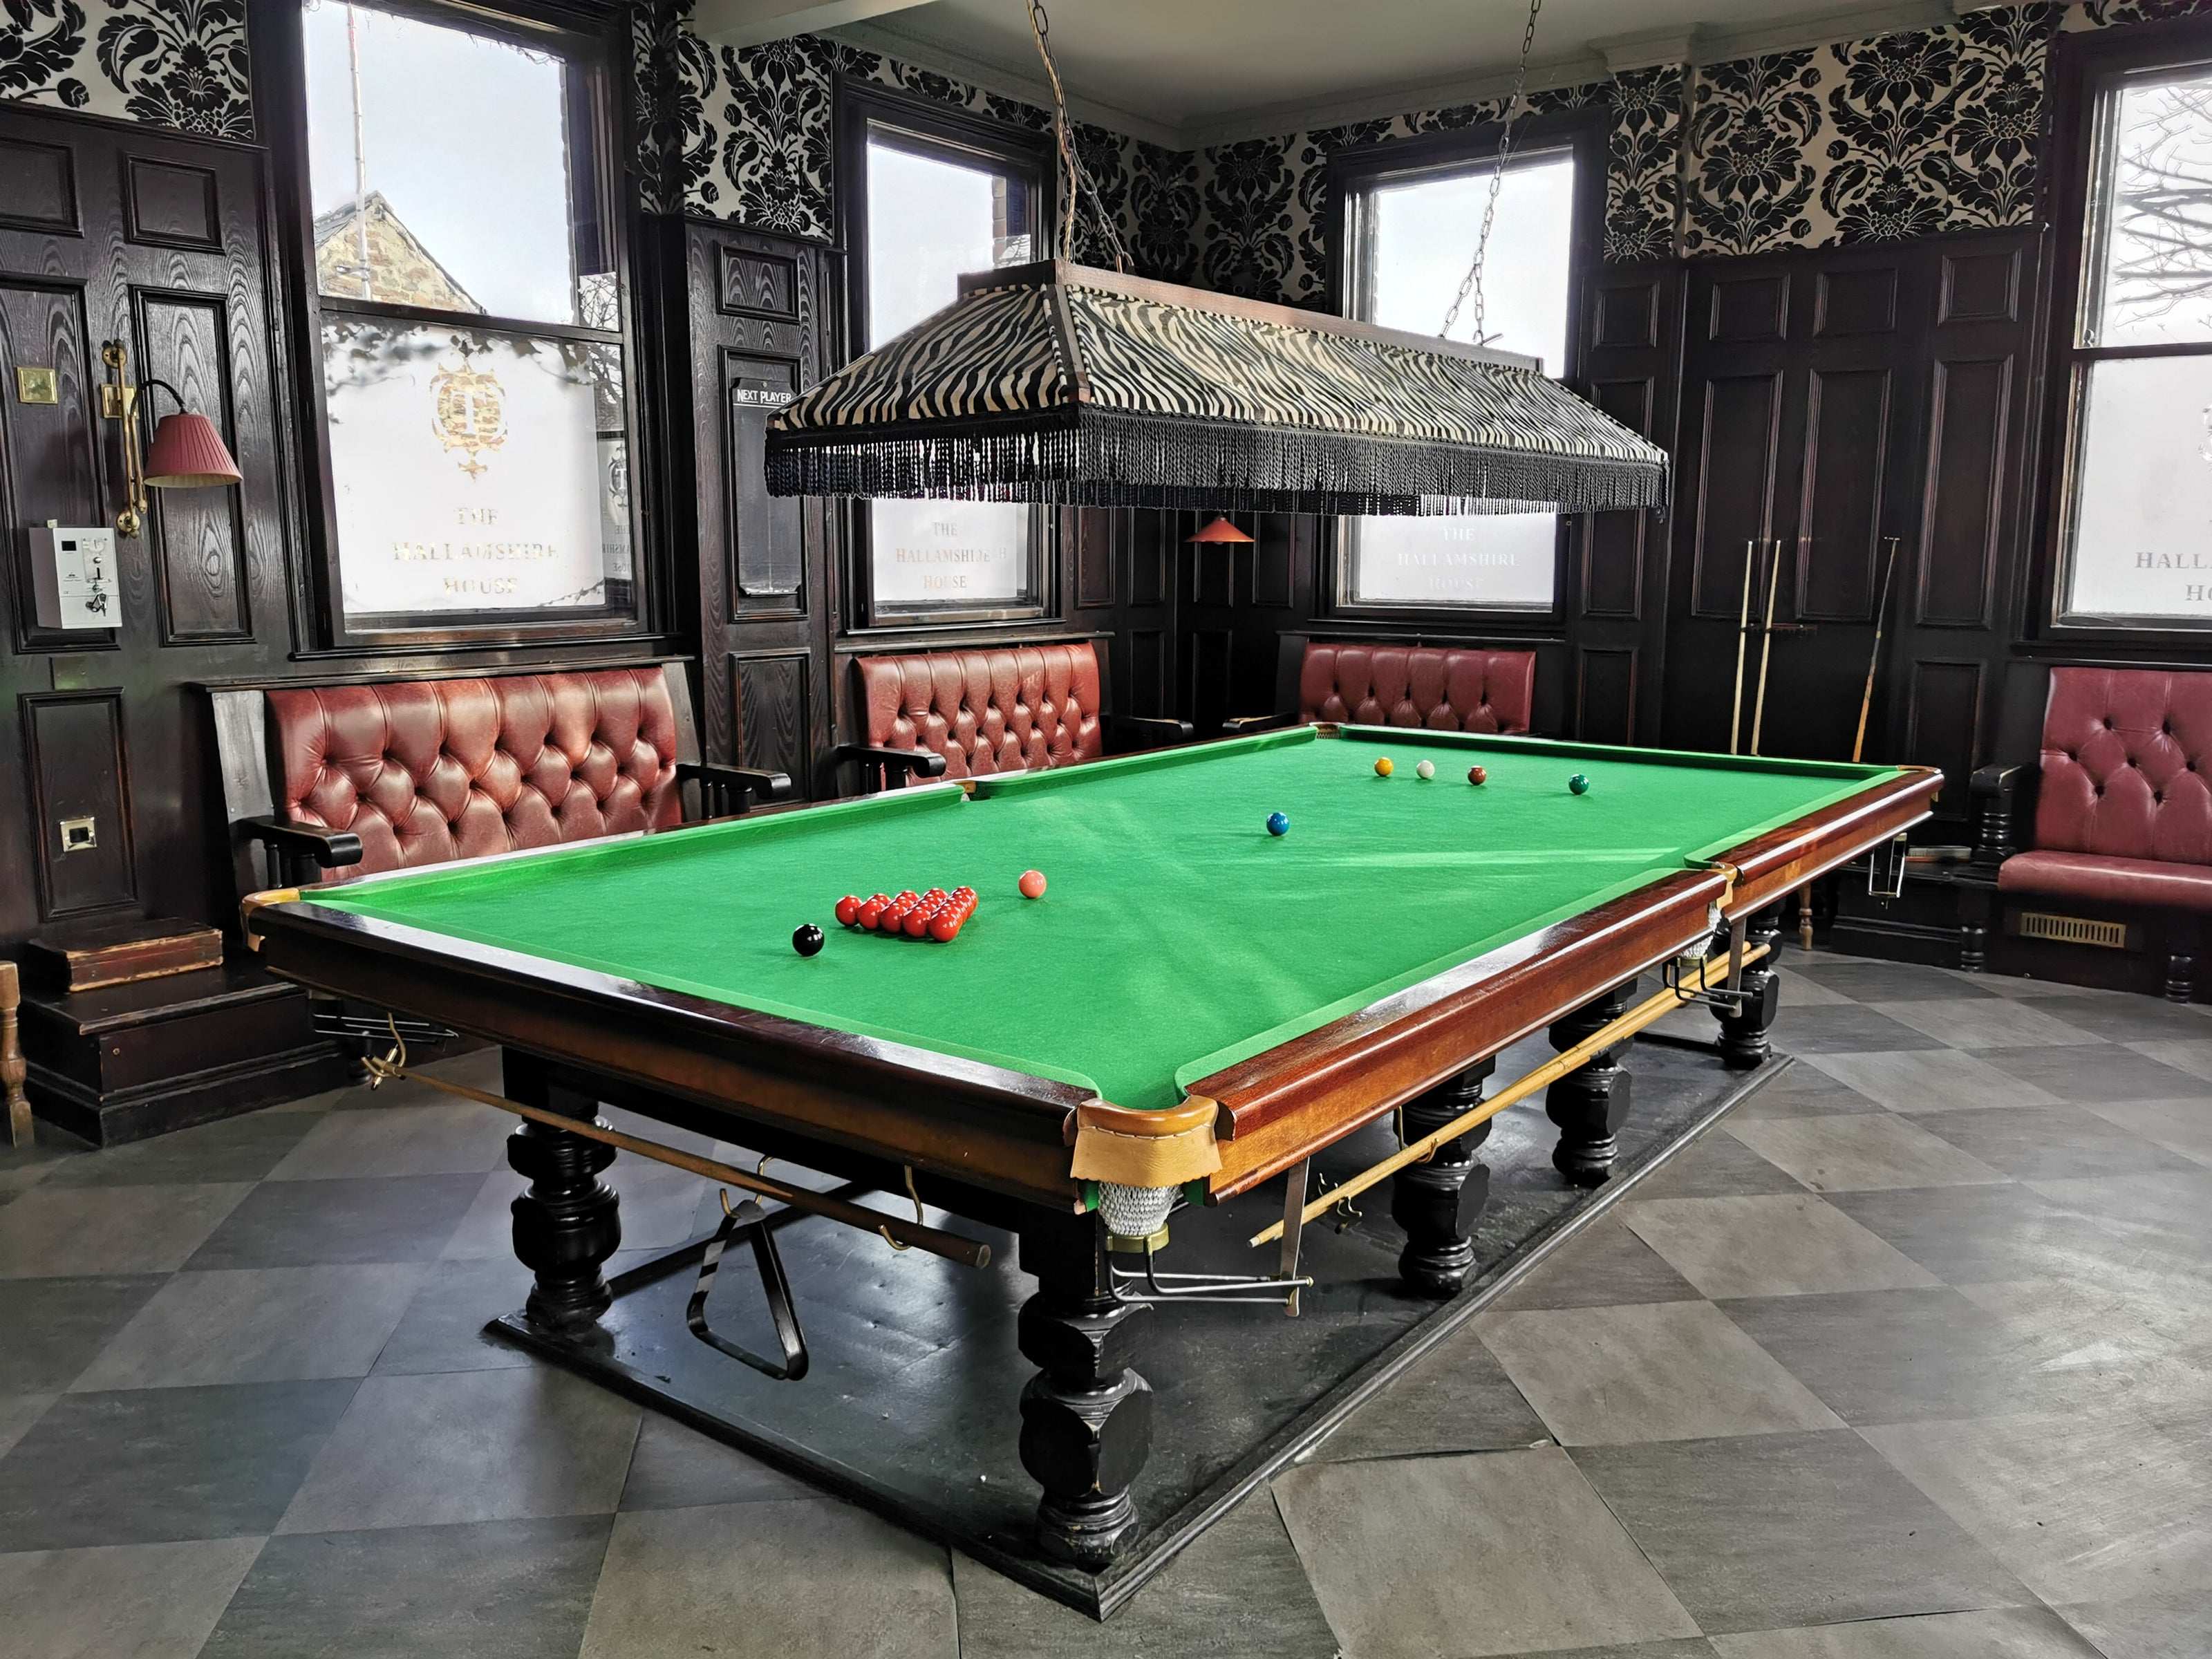 Snooker table inside the Hallamshire House Pub